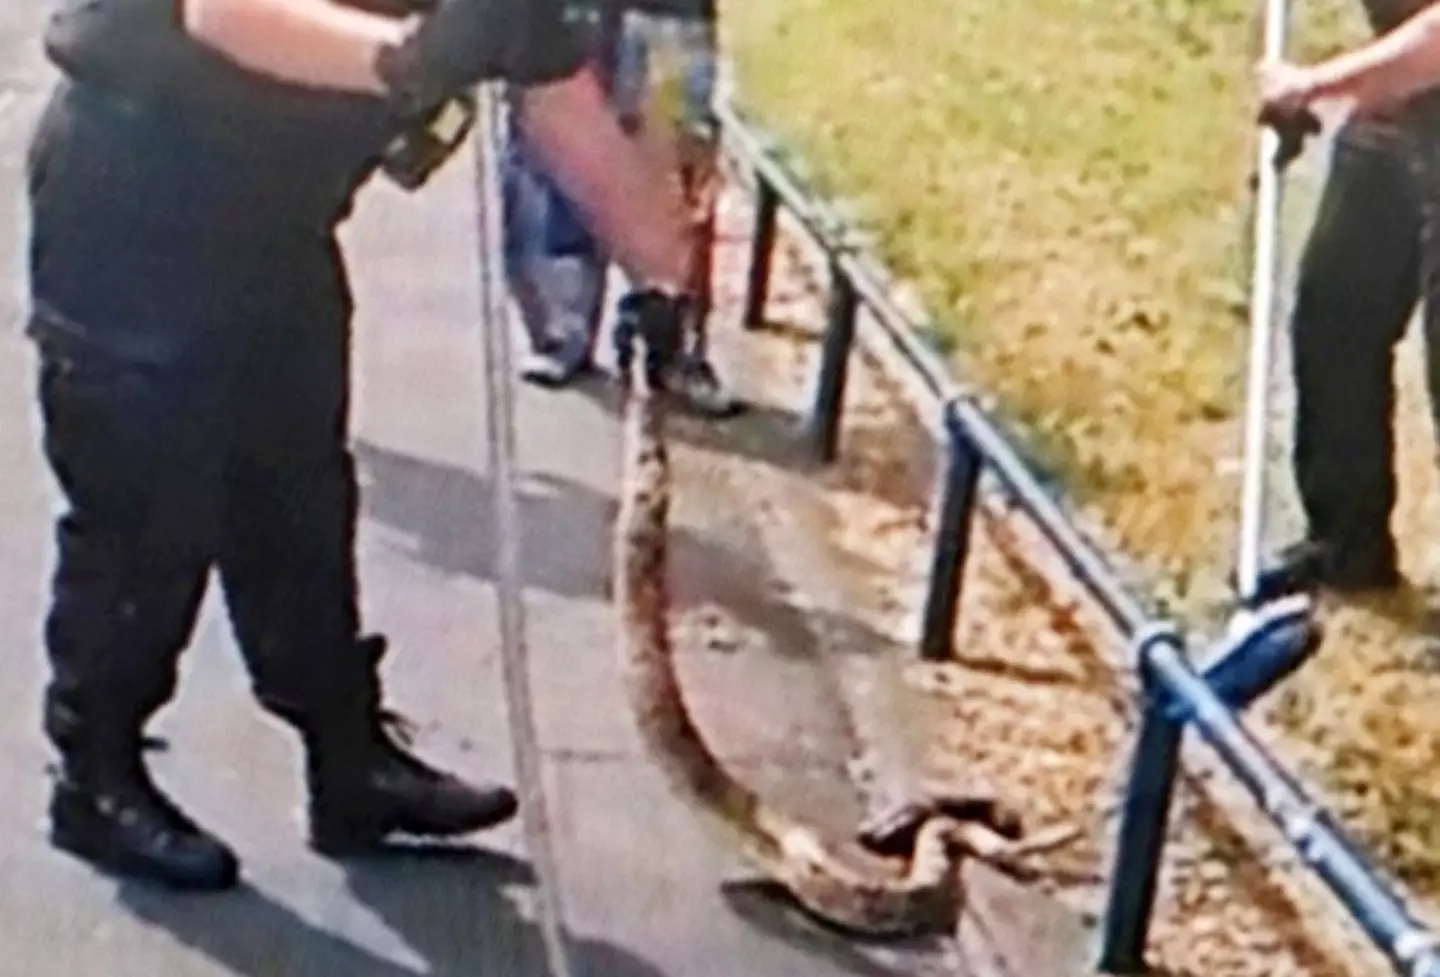 Police made use of a broom to help capture the animal, that's one way to clean up the streets.